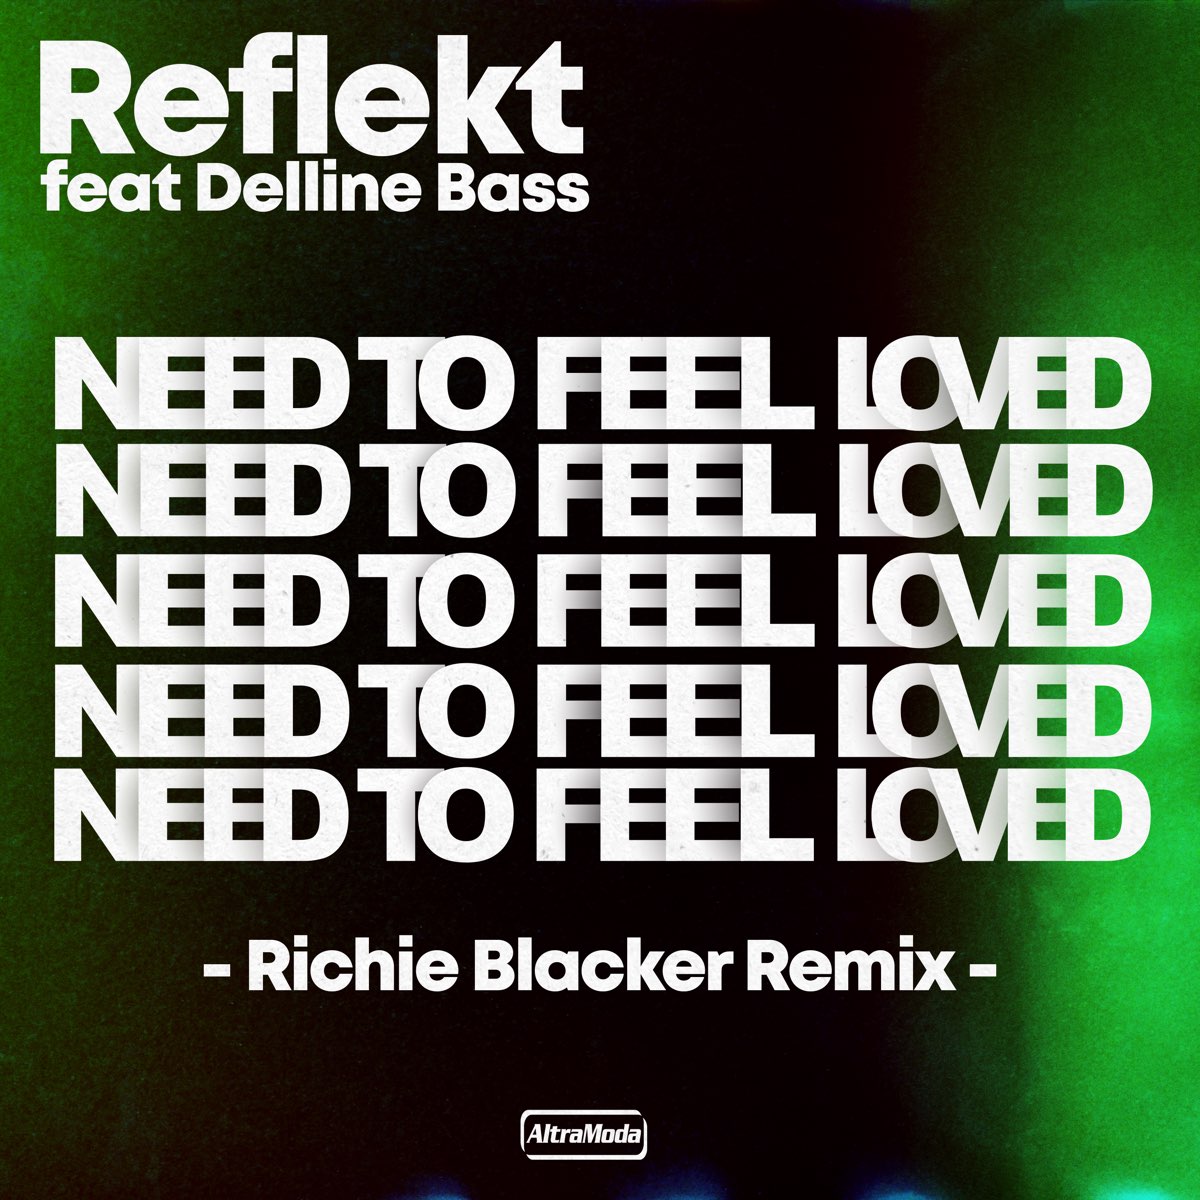 Need to feel loved feat delline bass